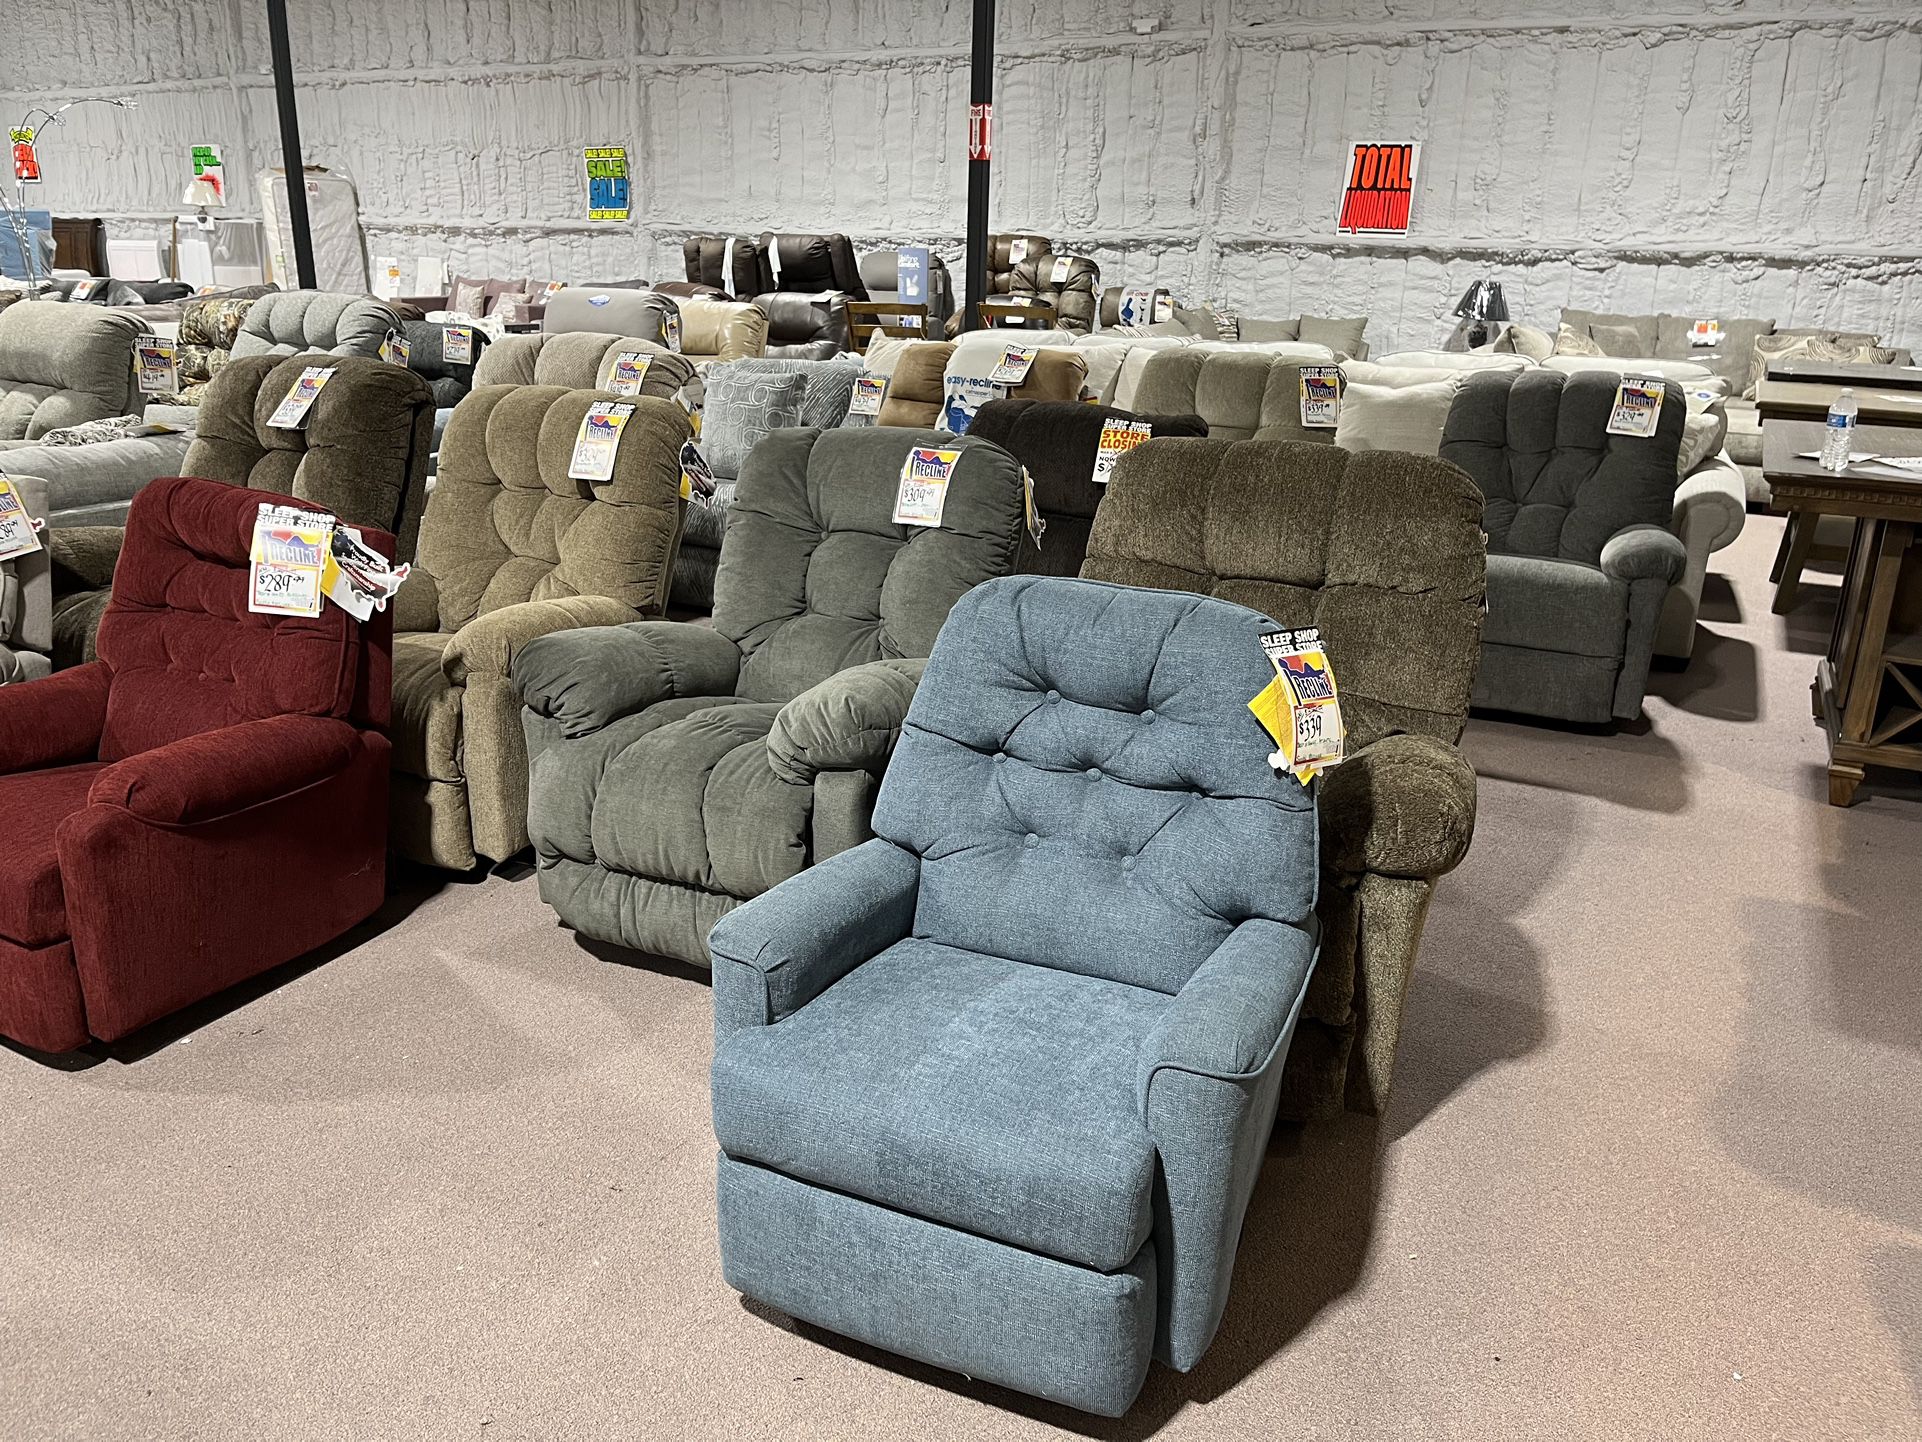 Recliner Sale Starts from $279